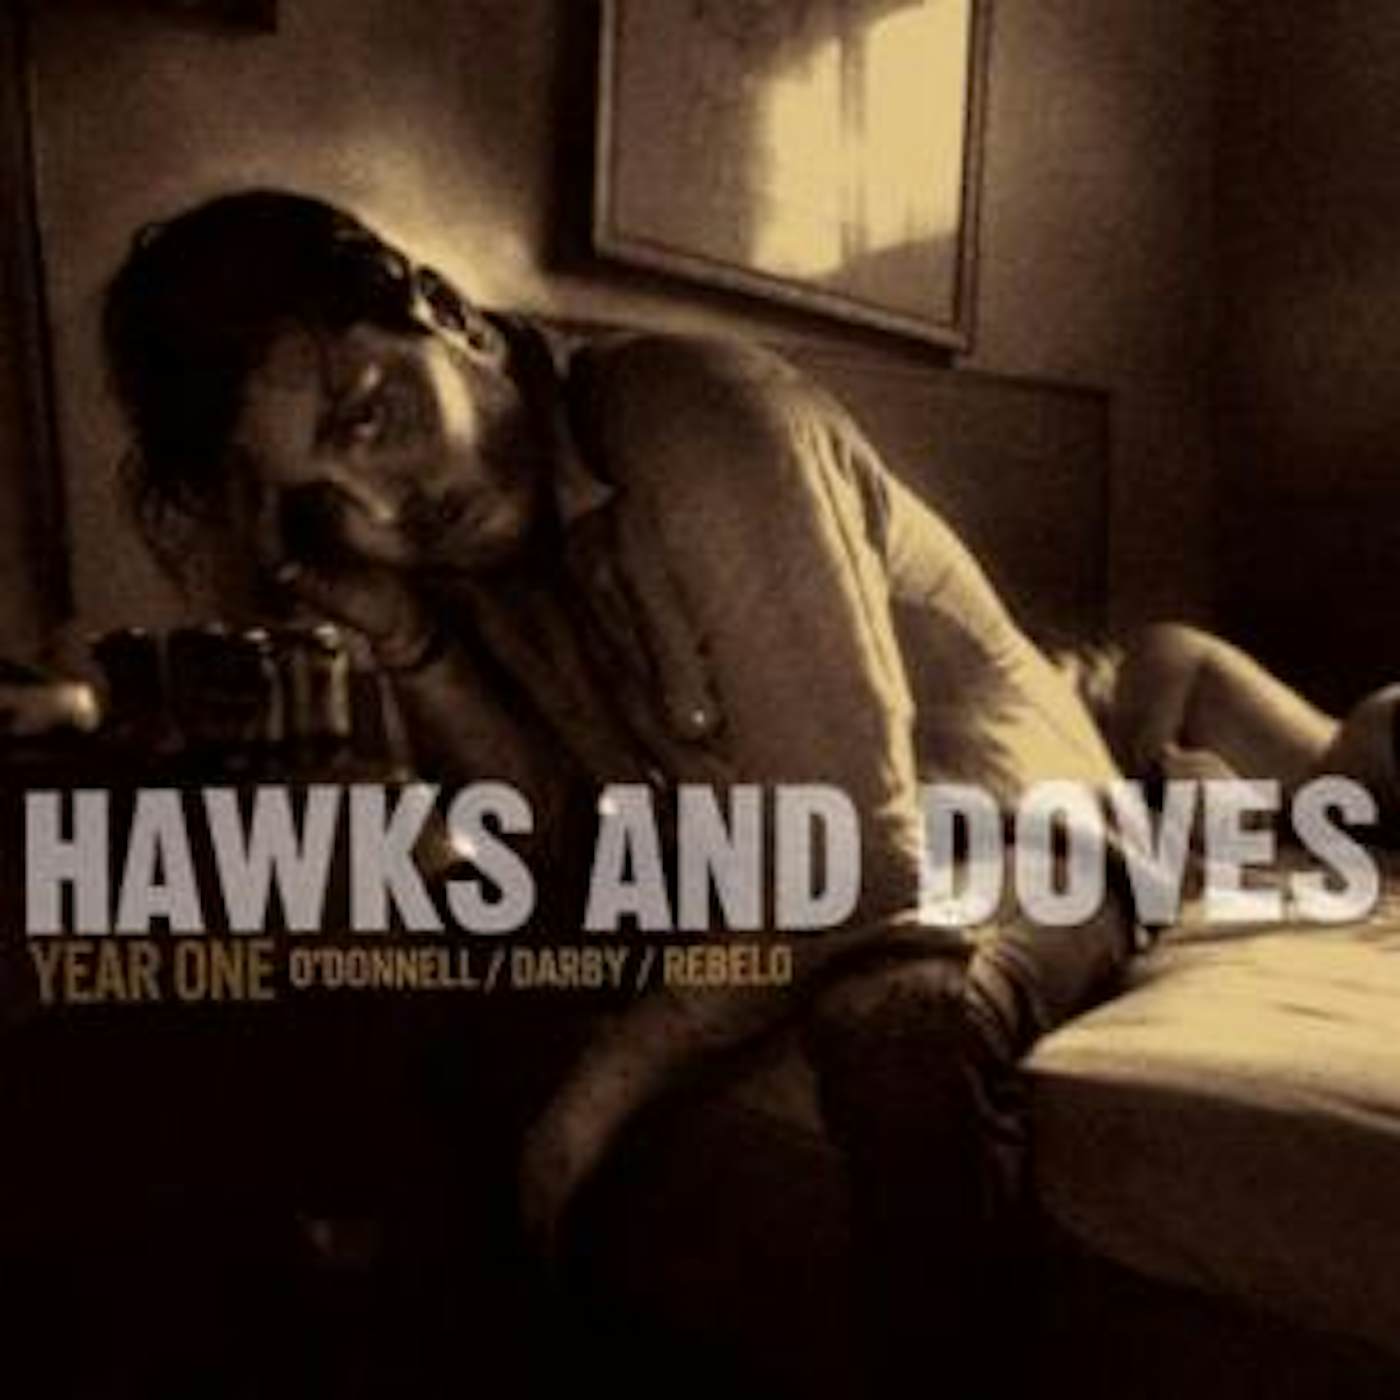 Hawks and Doves YEAR ONE CD